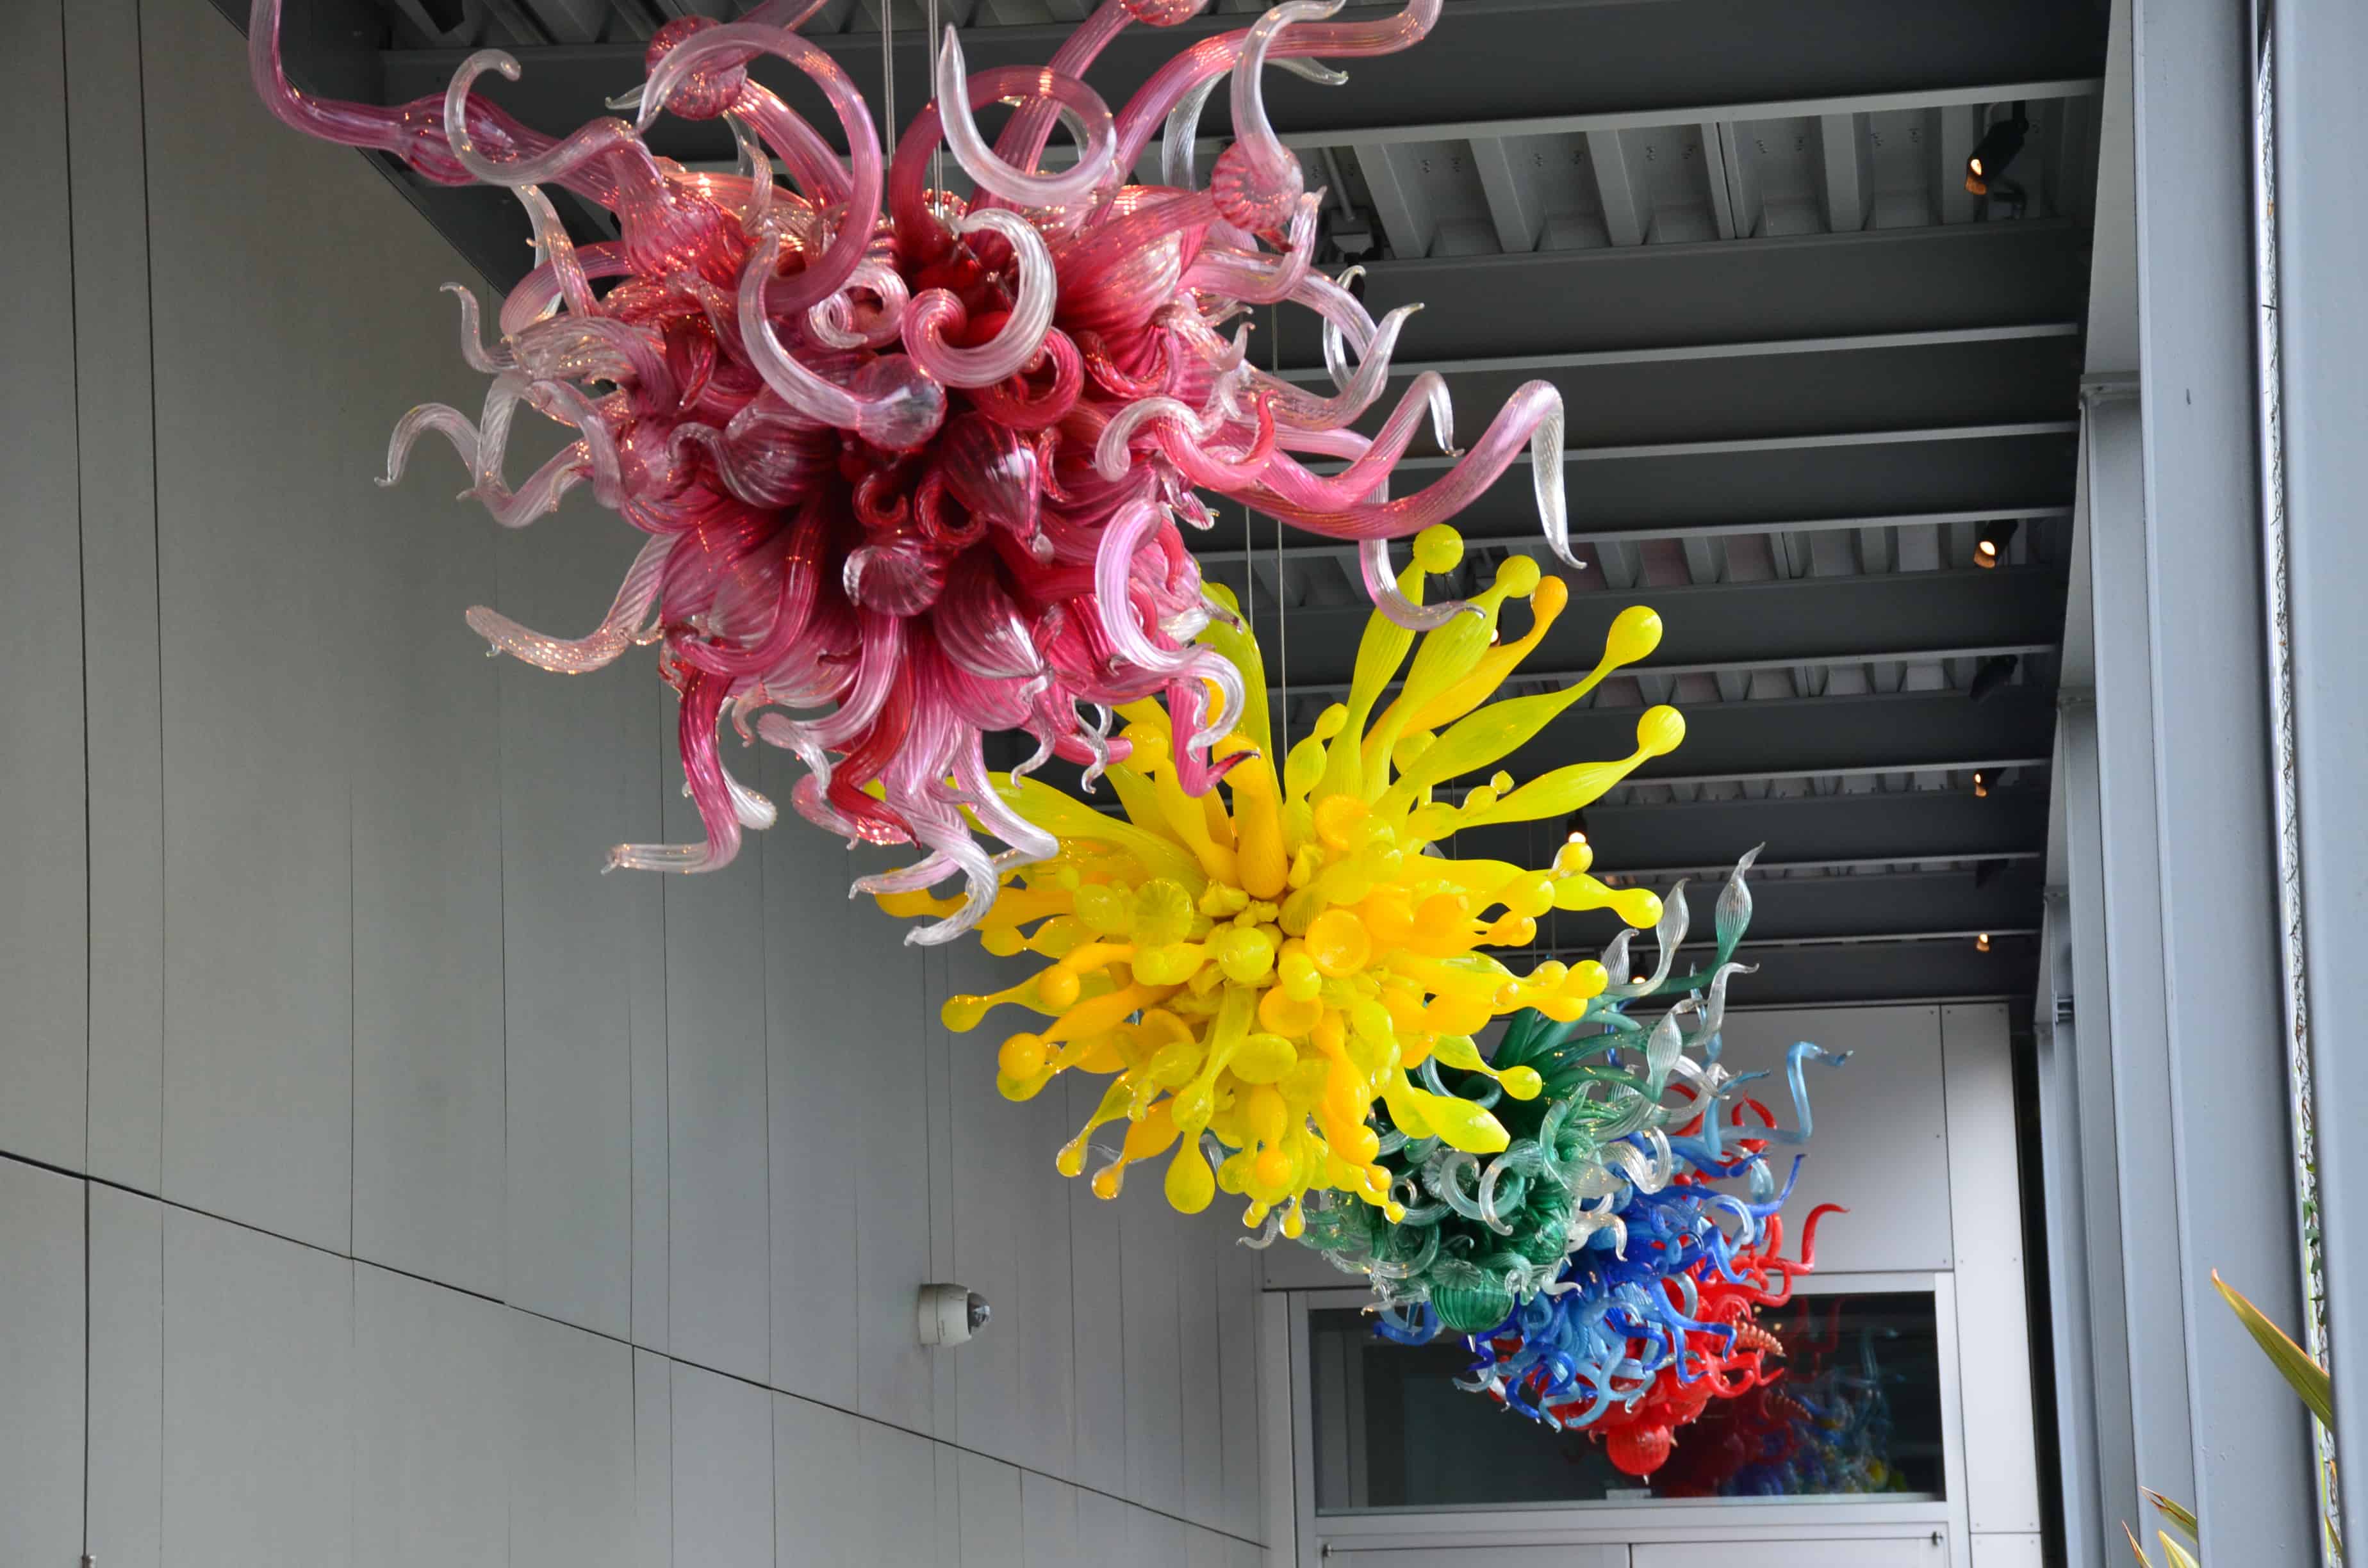 Chandeliers at Chihuly Garden and Glass in Seattle, Washington